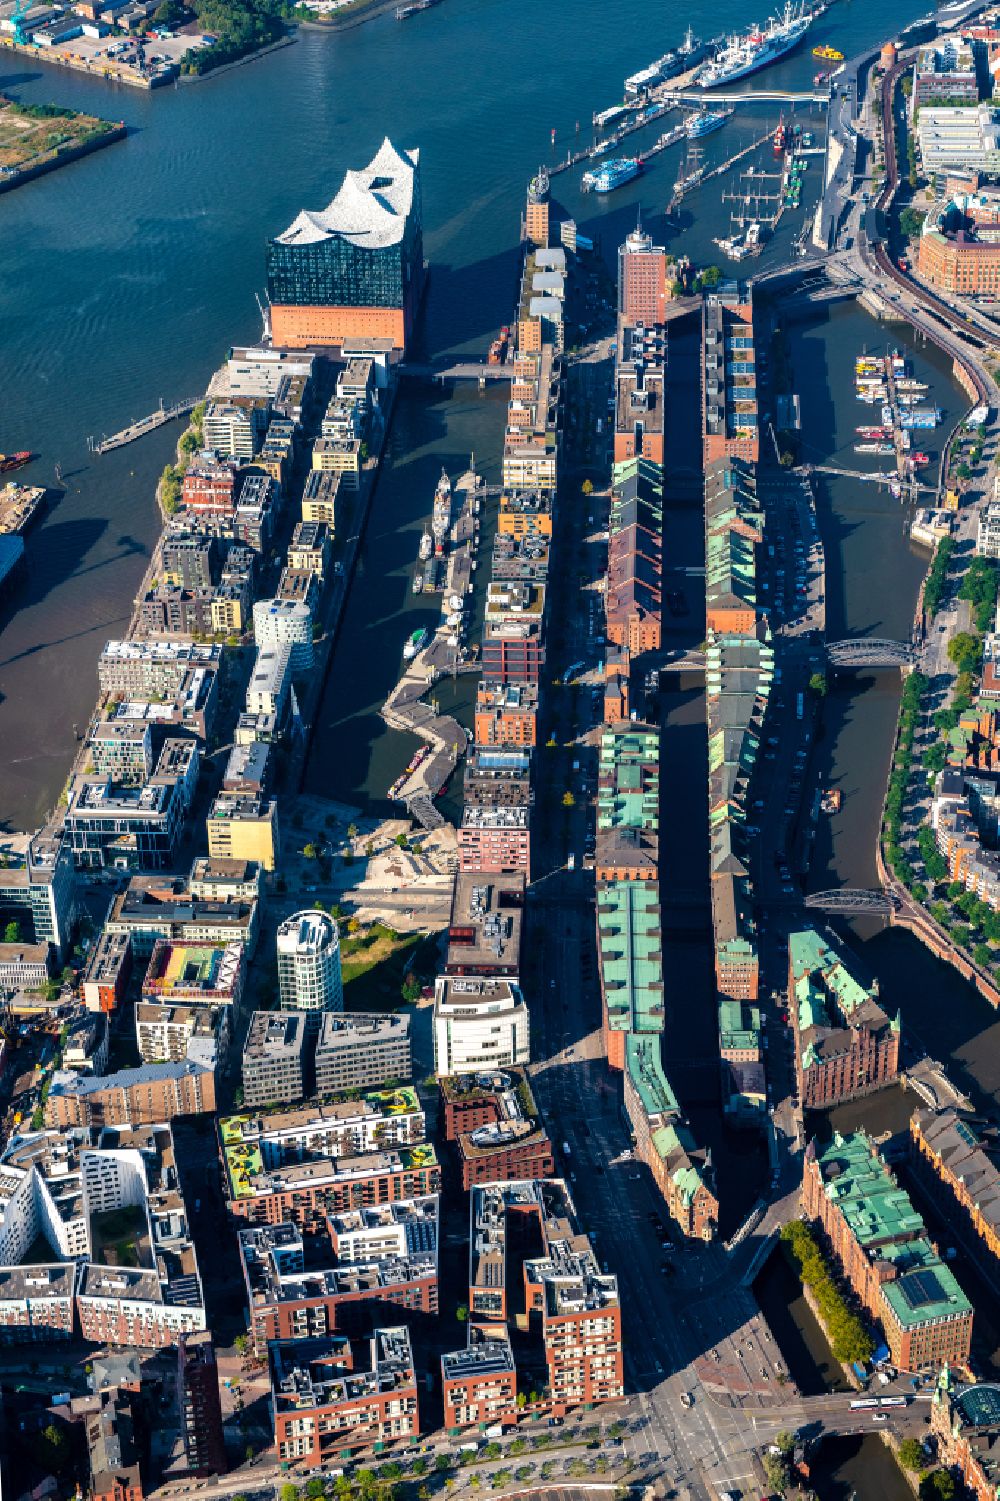 Hamburg from above - Buildings, streets and canals of the Hafencity and Speicherstadt in Hamburg, Germany